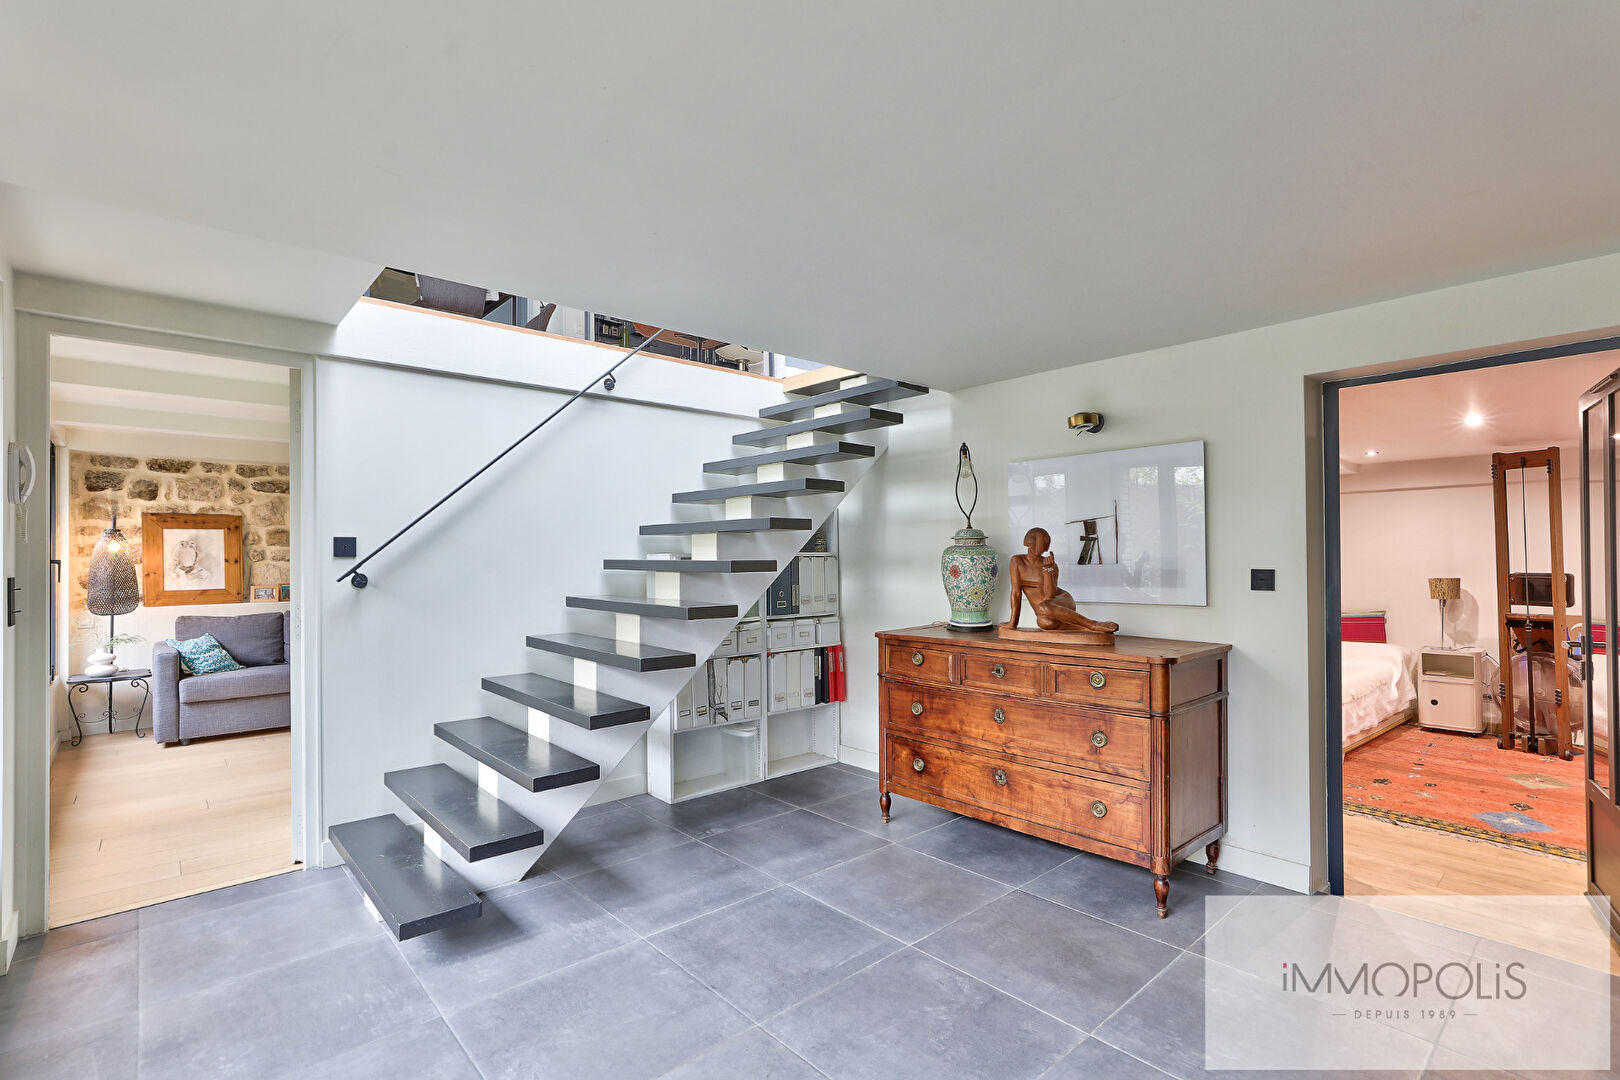 Off-Market: House with exceptional services in Saint Ouen sur Seine, 6 rooms, large reception, 1 interior courtyard and 1 terrace 10